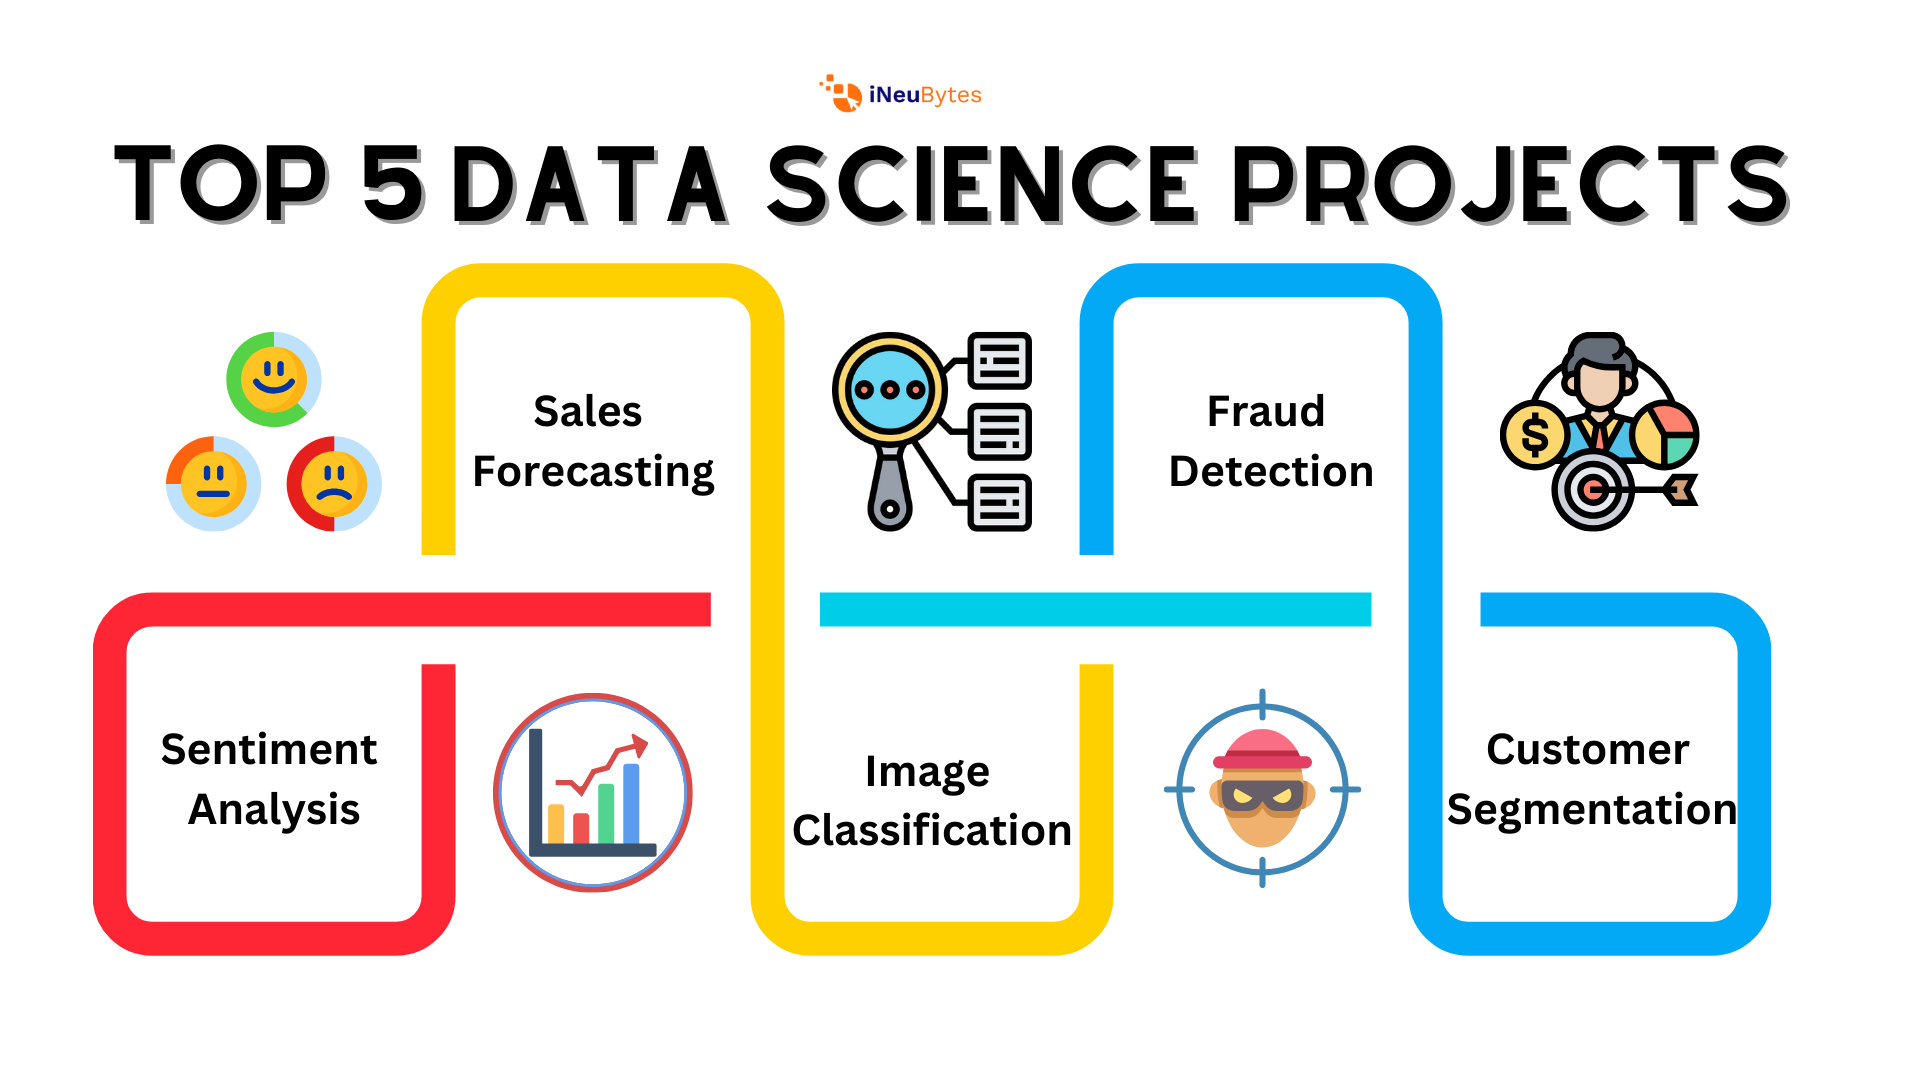 5 major data science projects